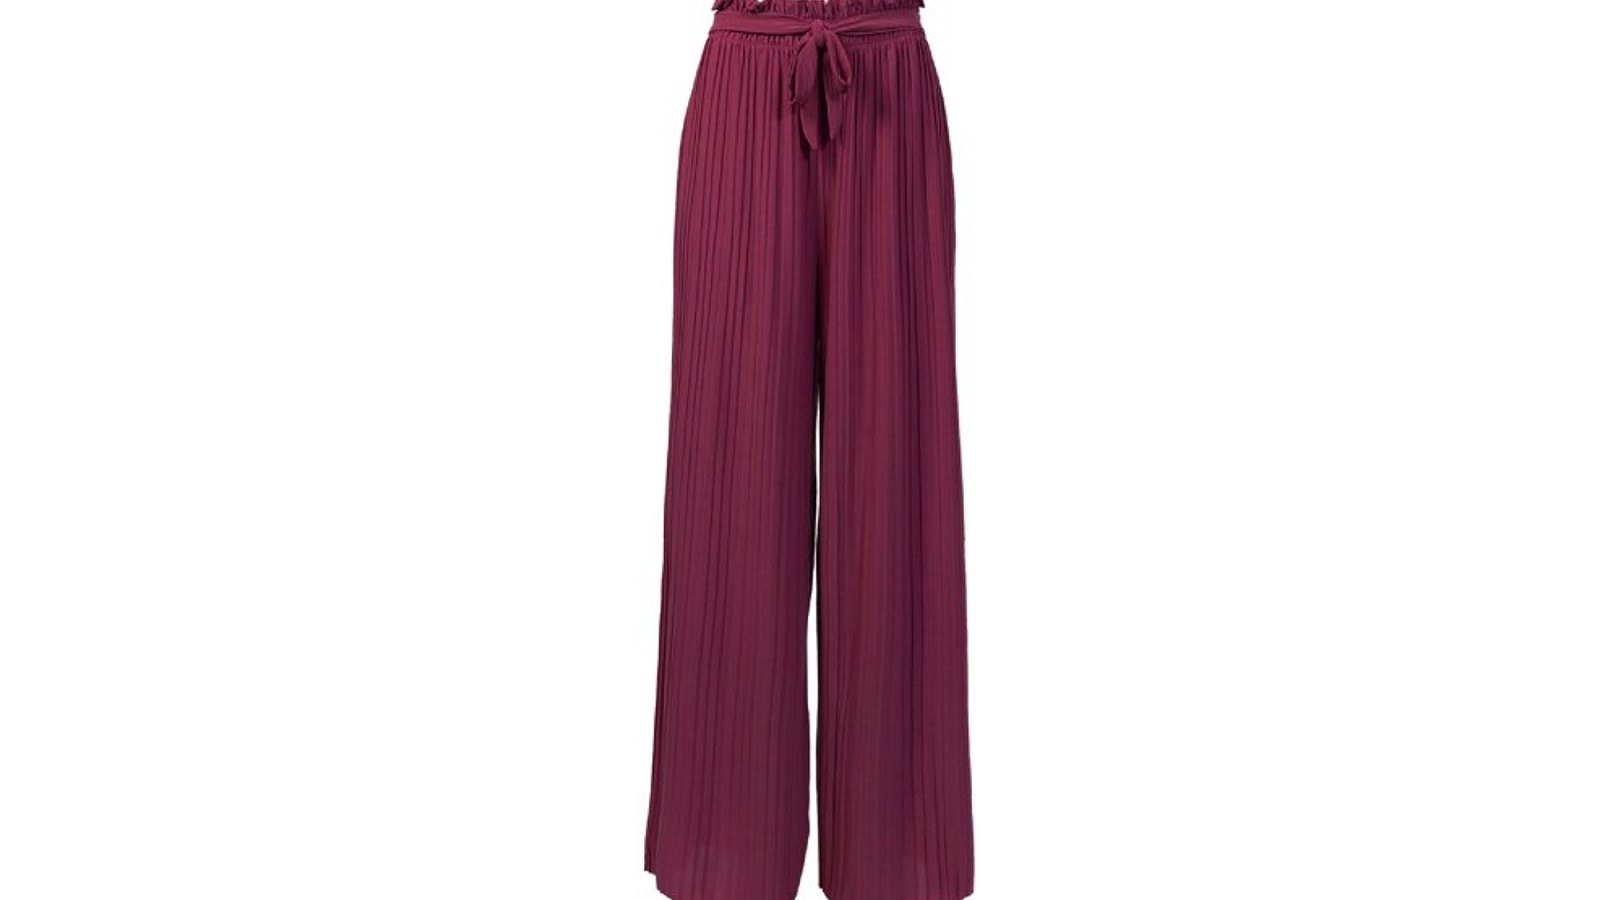 Made by Olivia Pleated Wide Leg Palazzo Pants